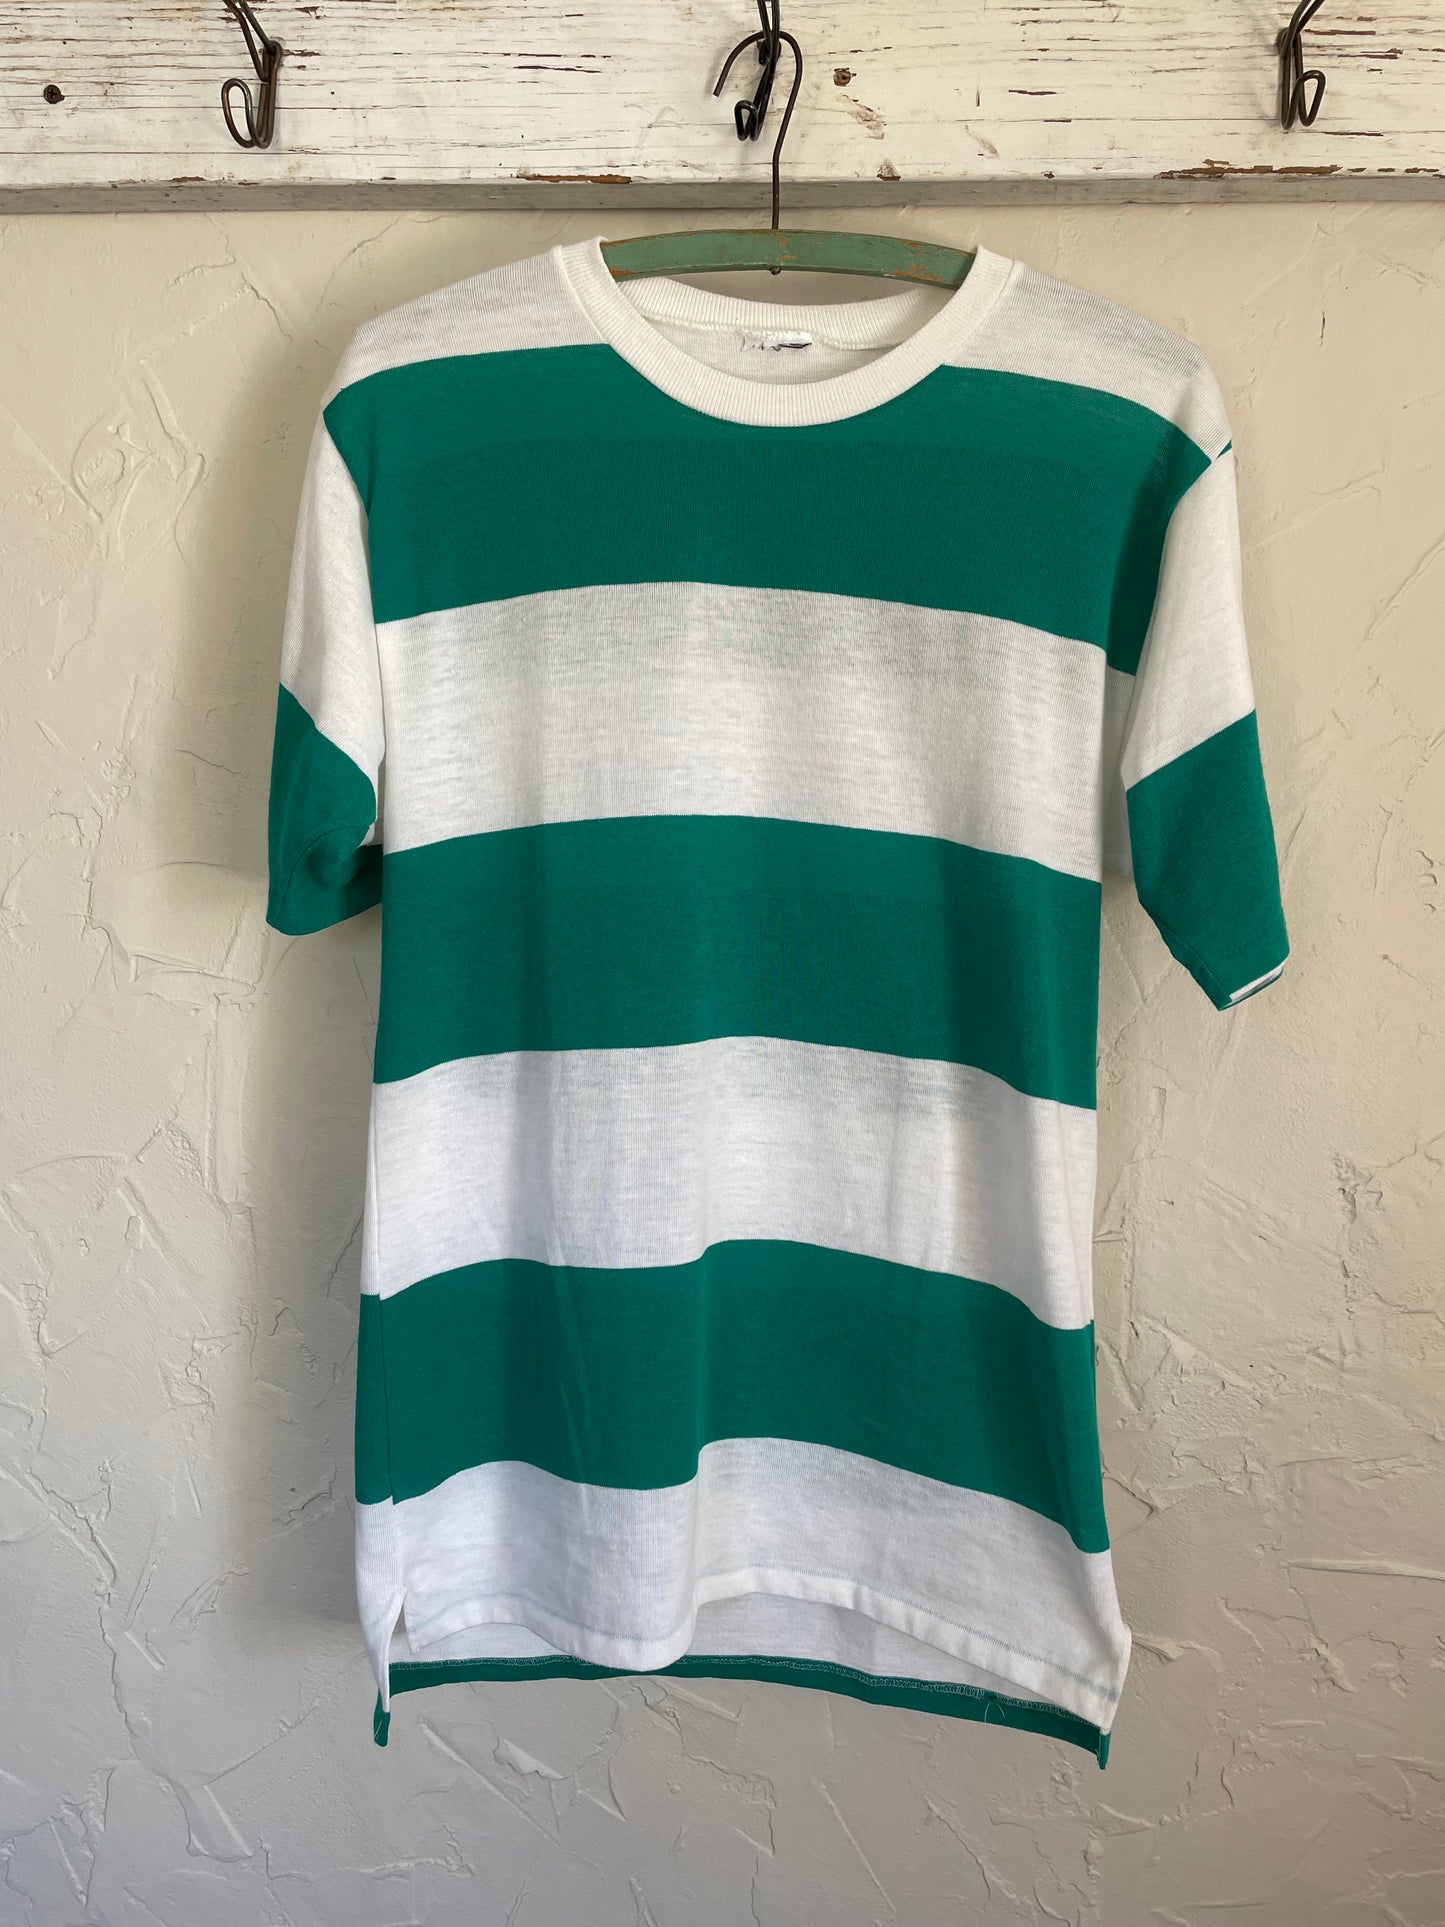 80s Green and White Striped Tee